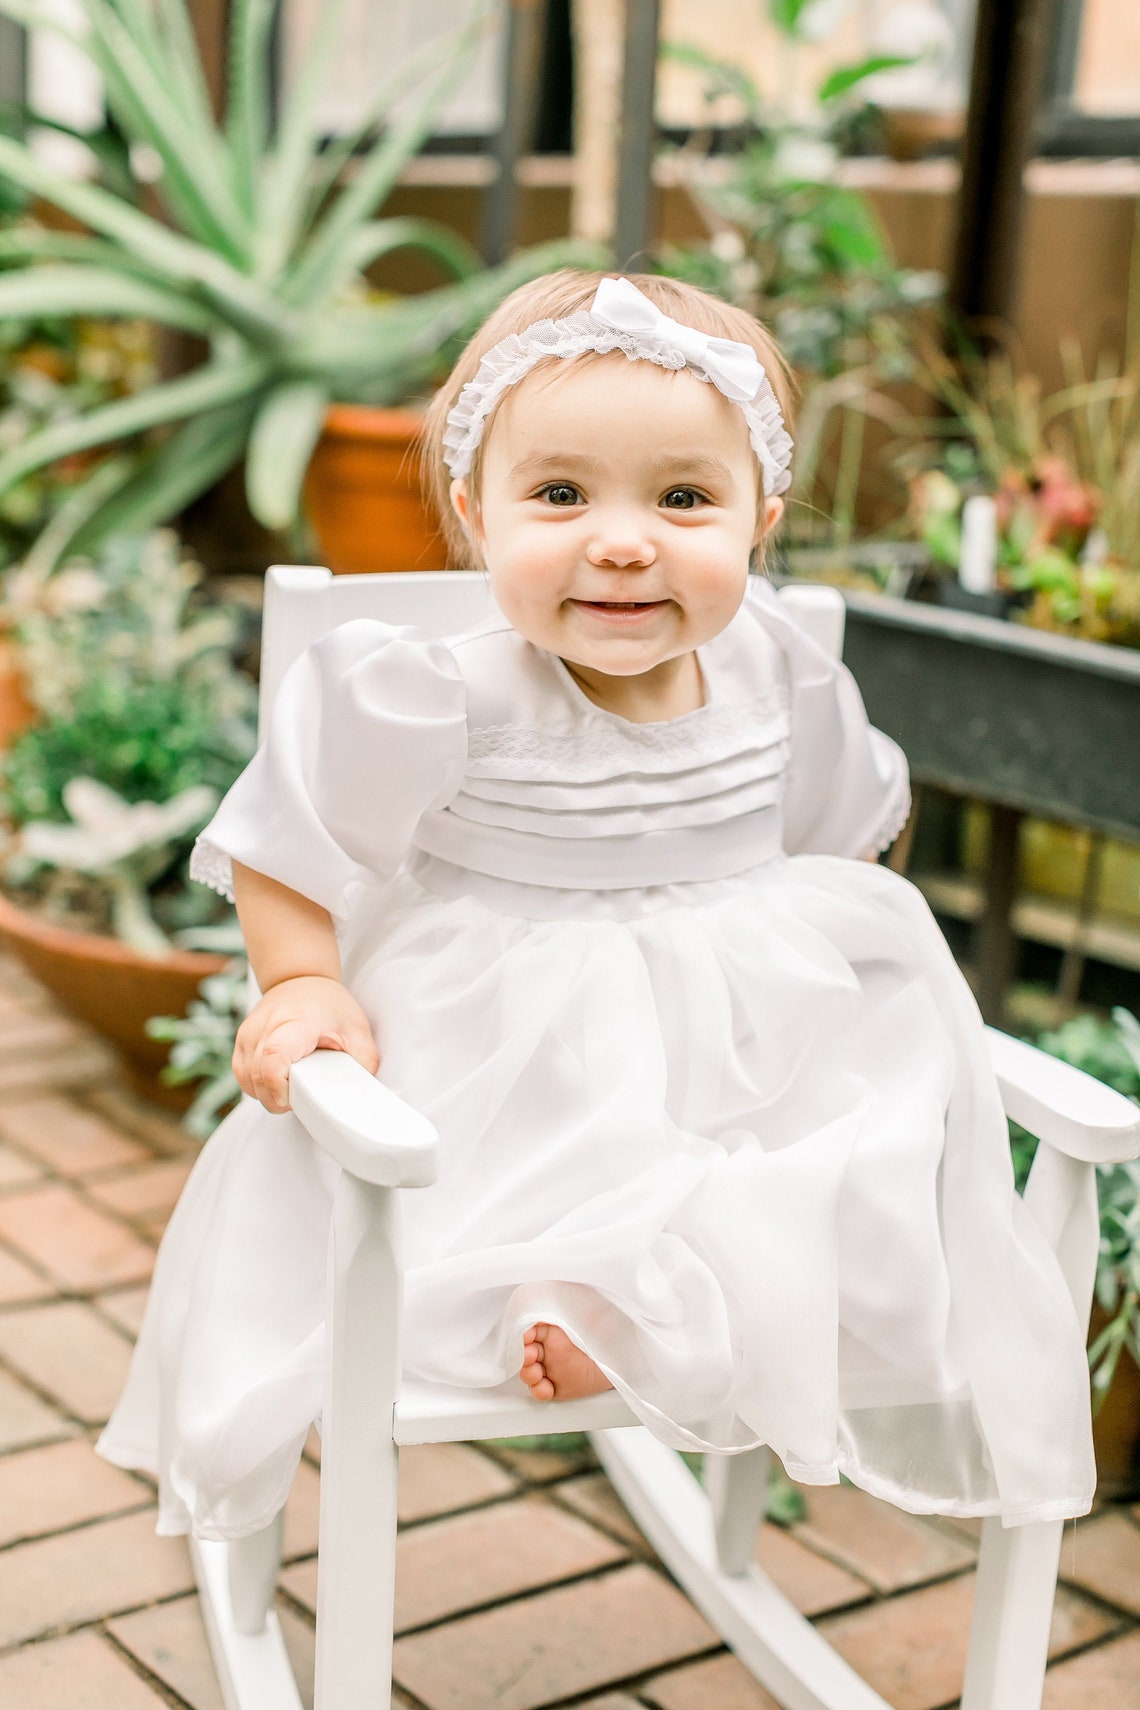 Girls Baptism Gown Classic White Baptism Gown Christening Etsy